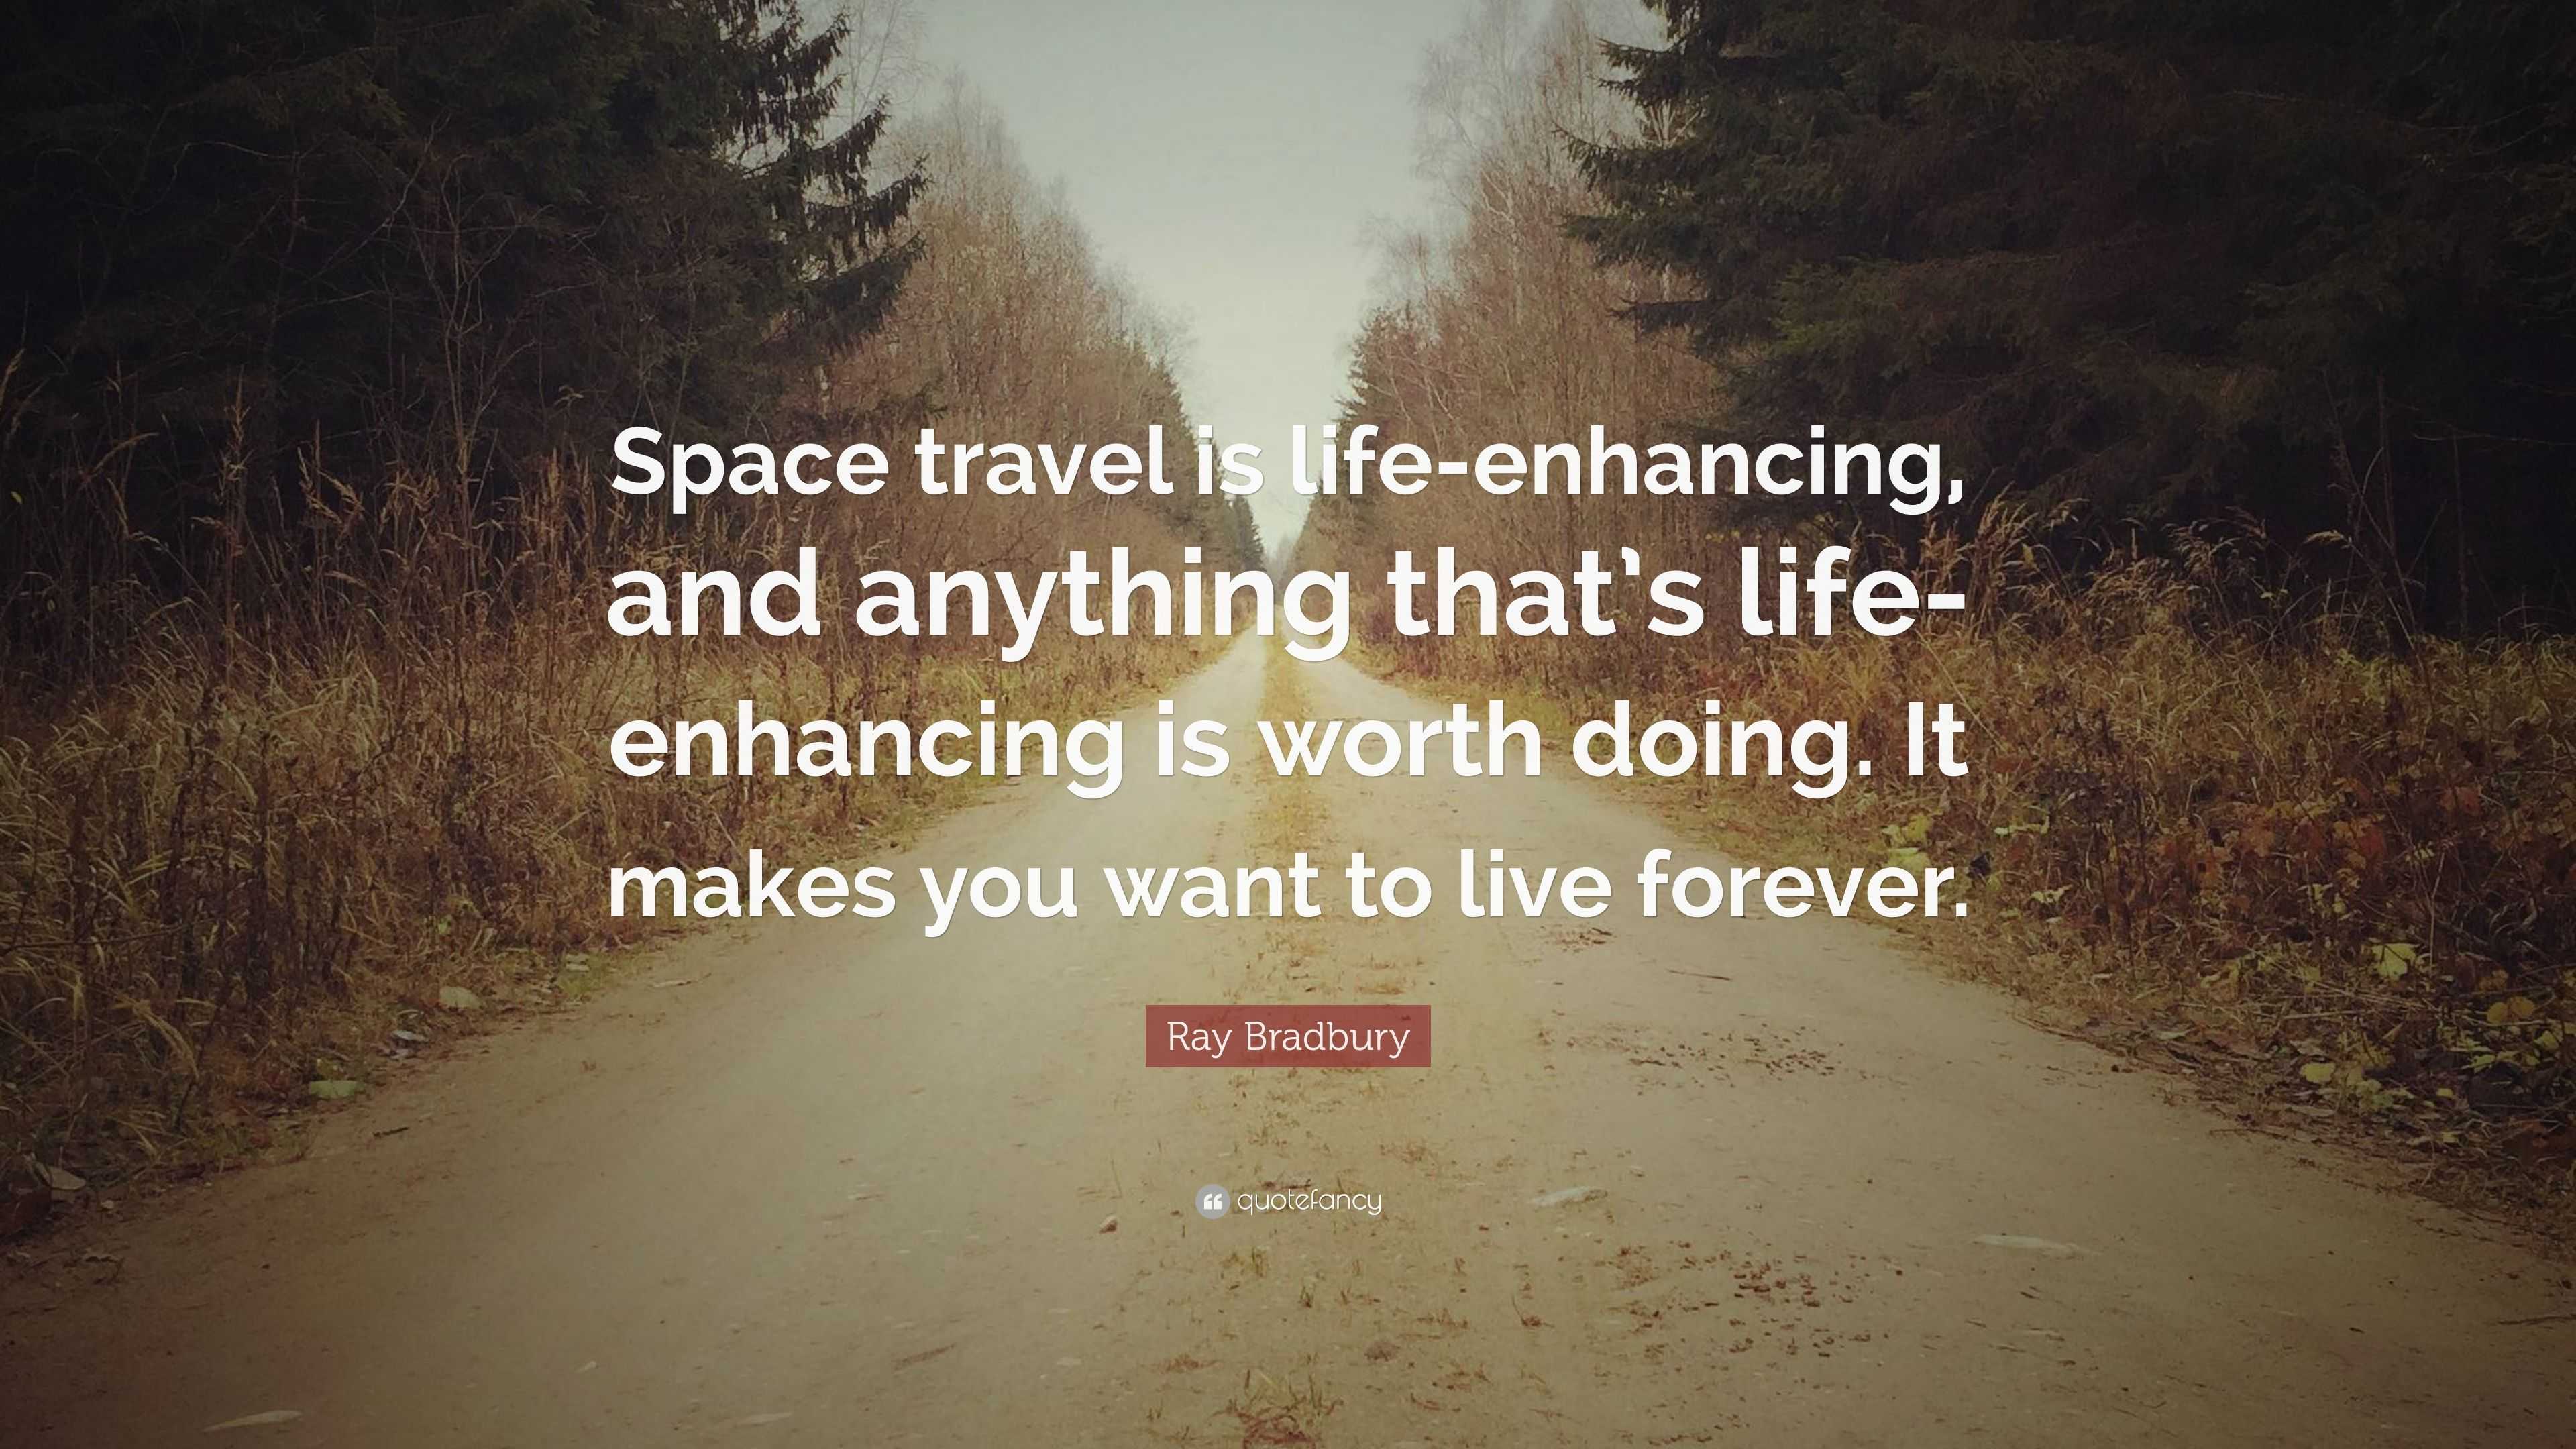 Ray Bradbury Quote: “Space travel is life-enhancing, and anything that